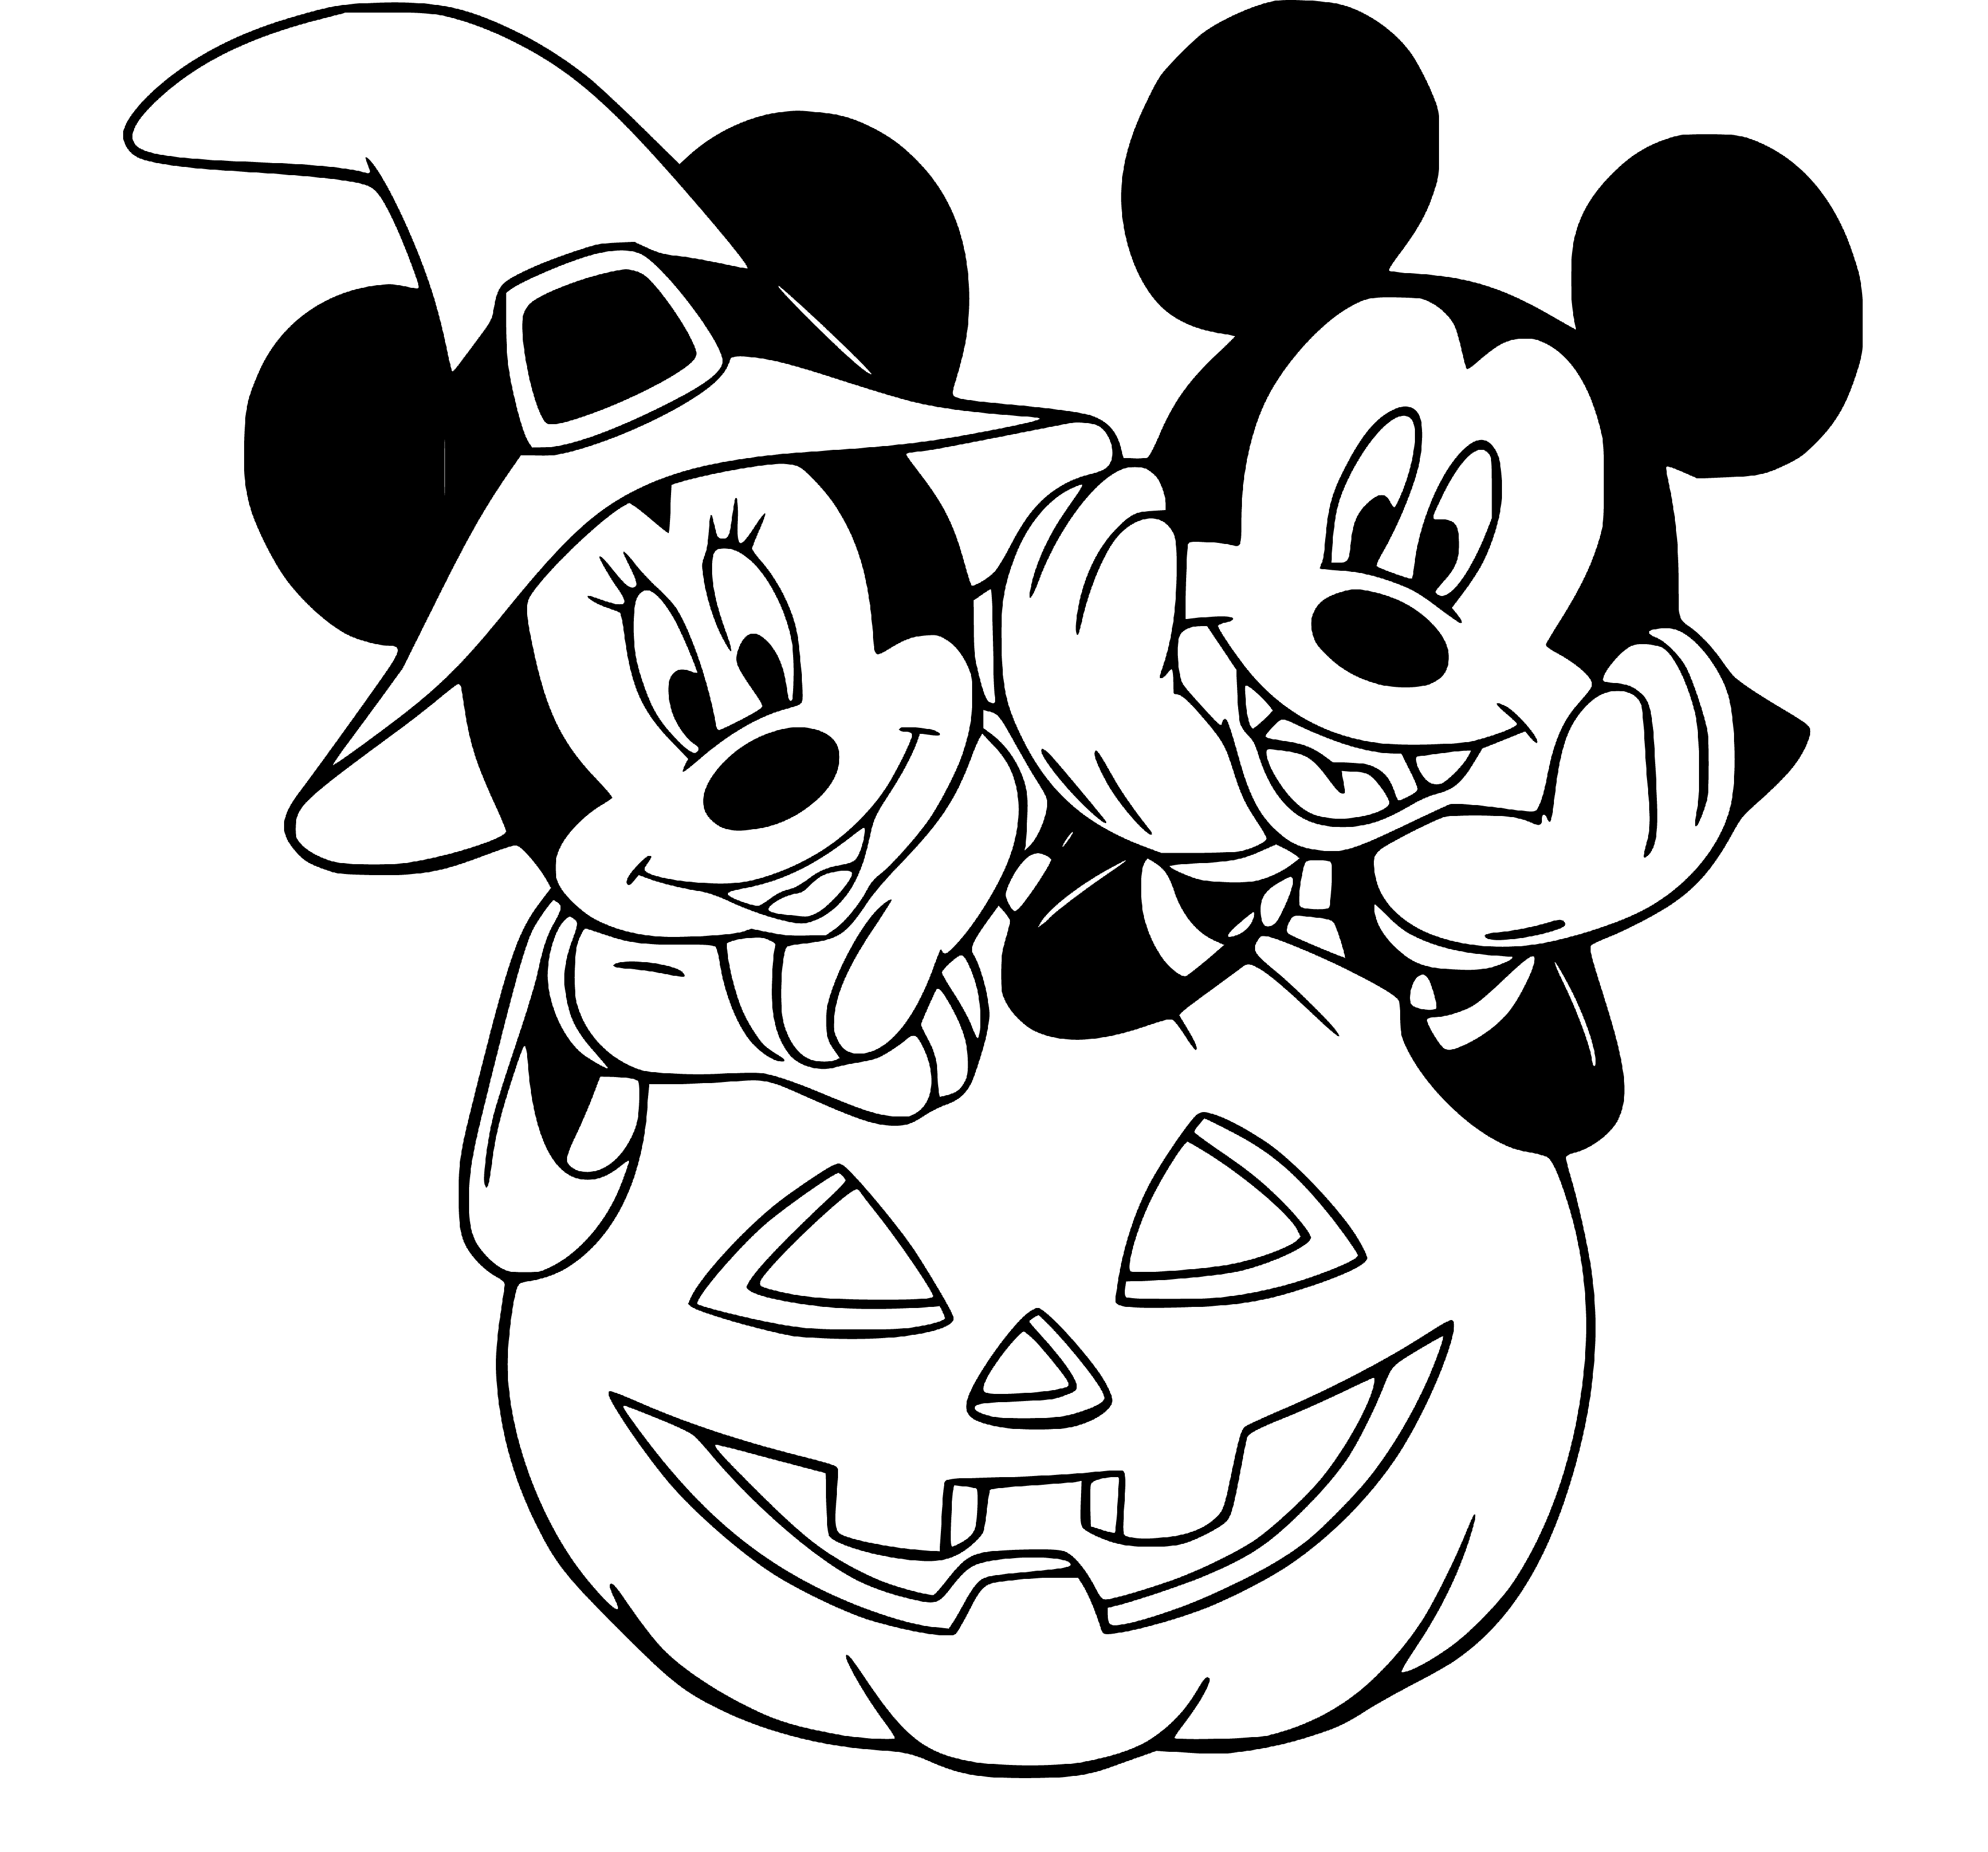 Minnie Mouse and Mickey Halloween Coloring Sheets - SheetalColor.com